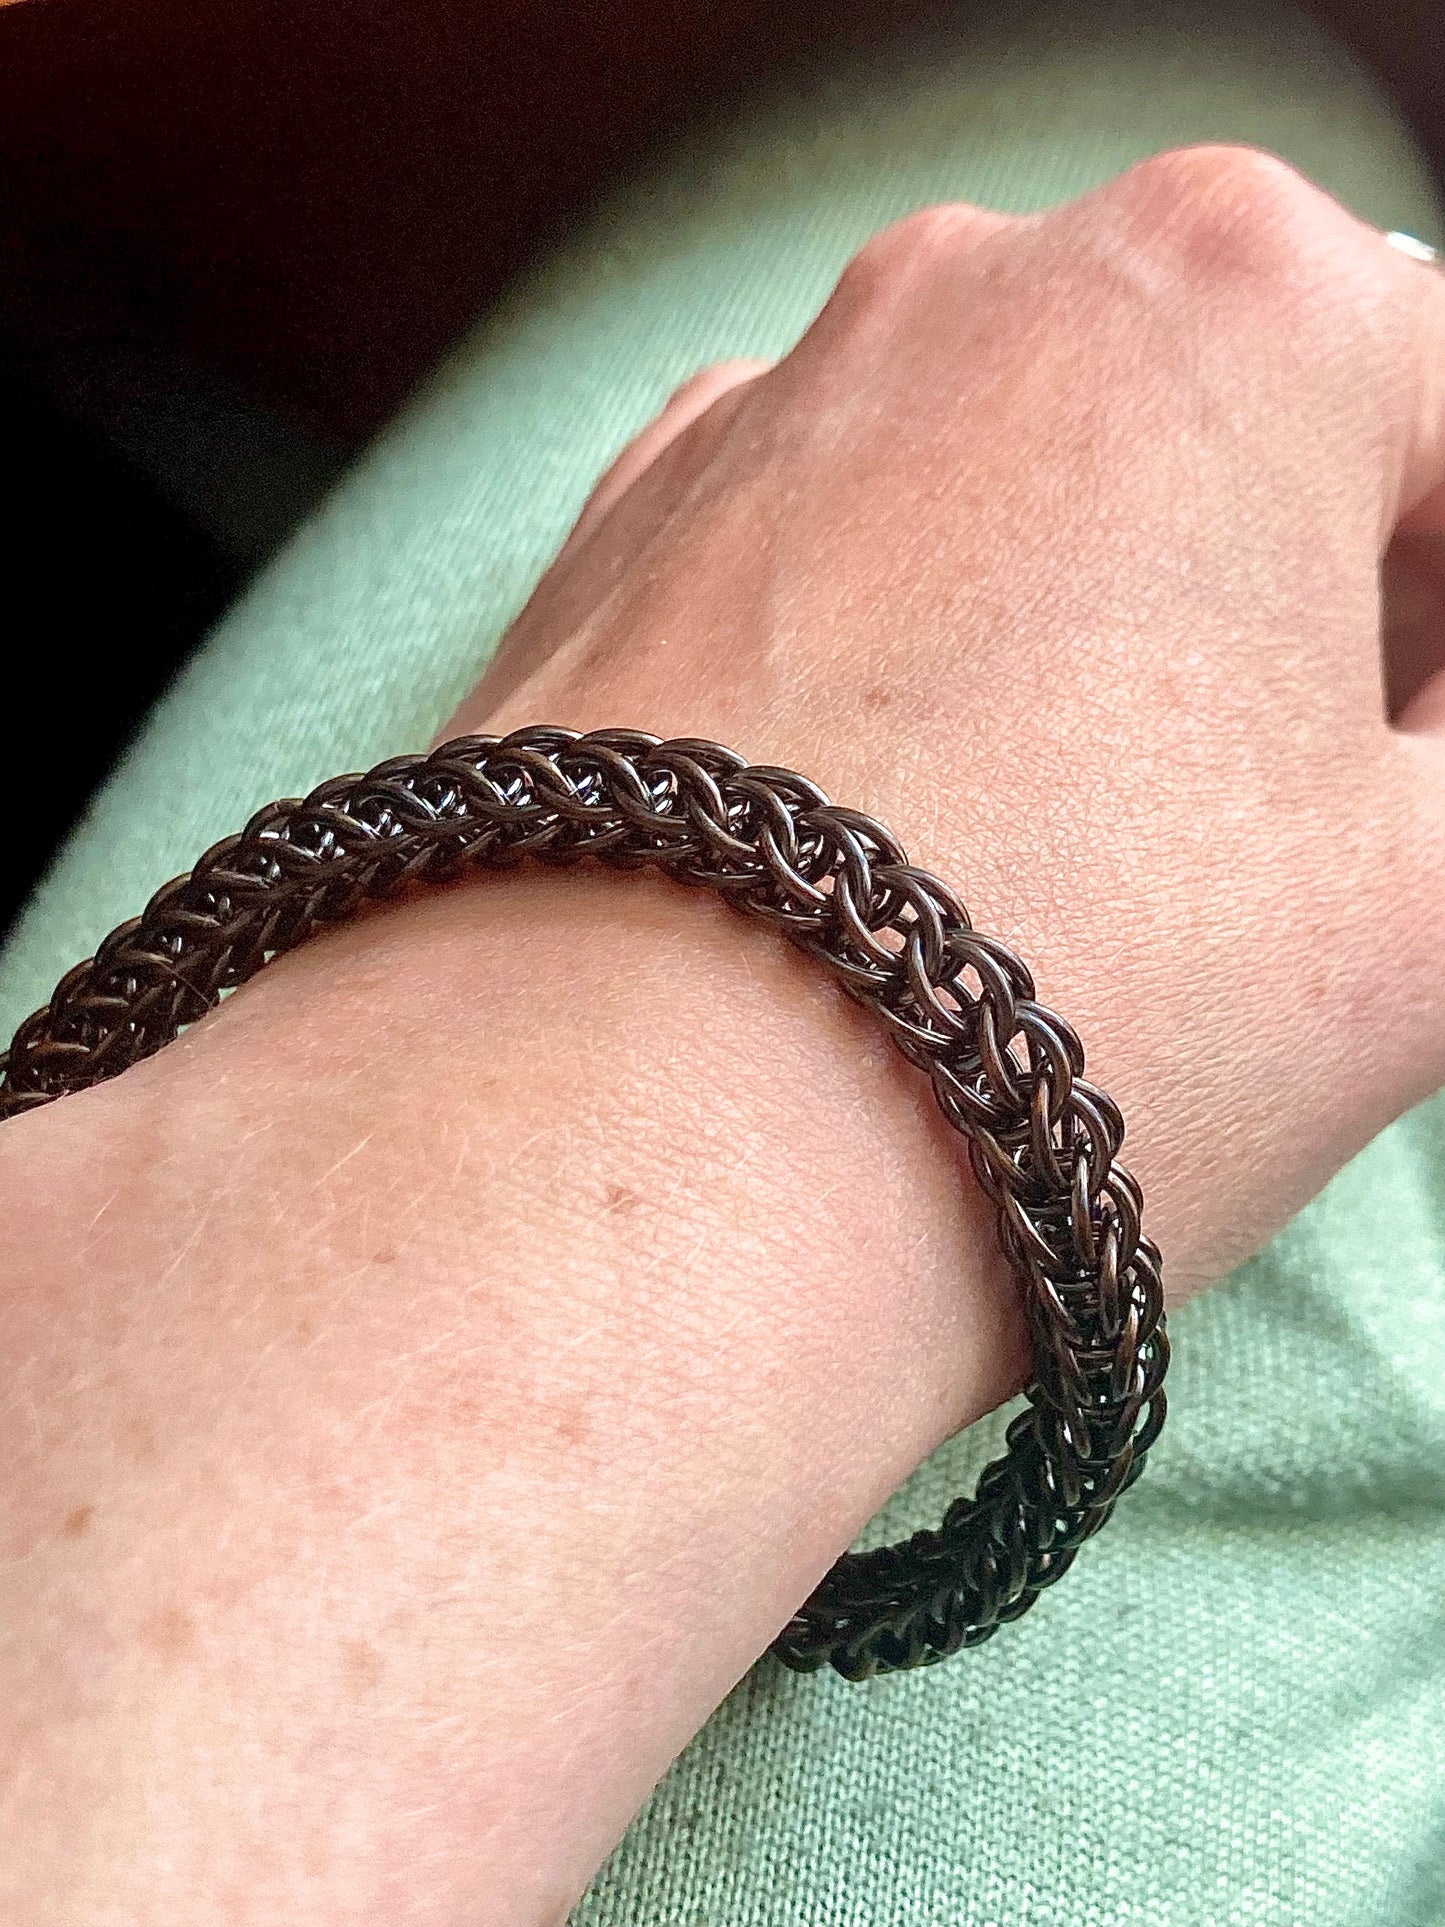 Chunky Foxtail Chainmaille Bracelet in Oxidized Copper